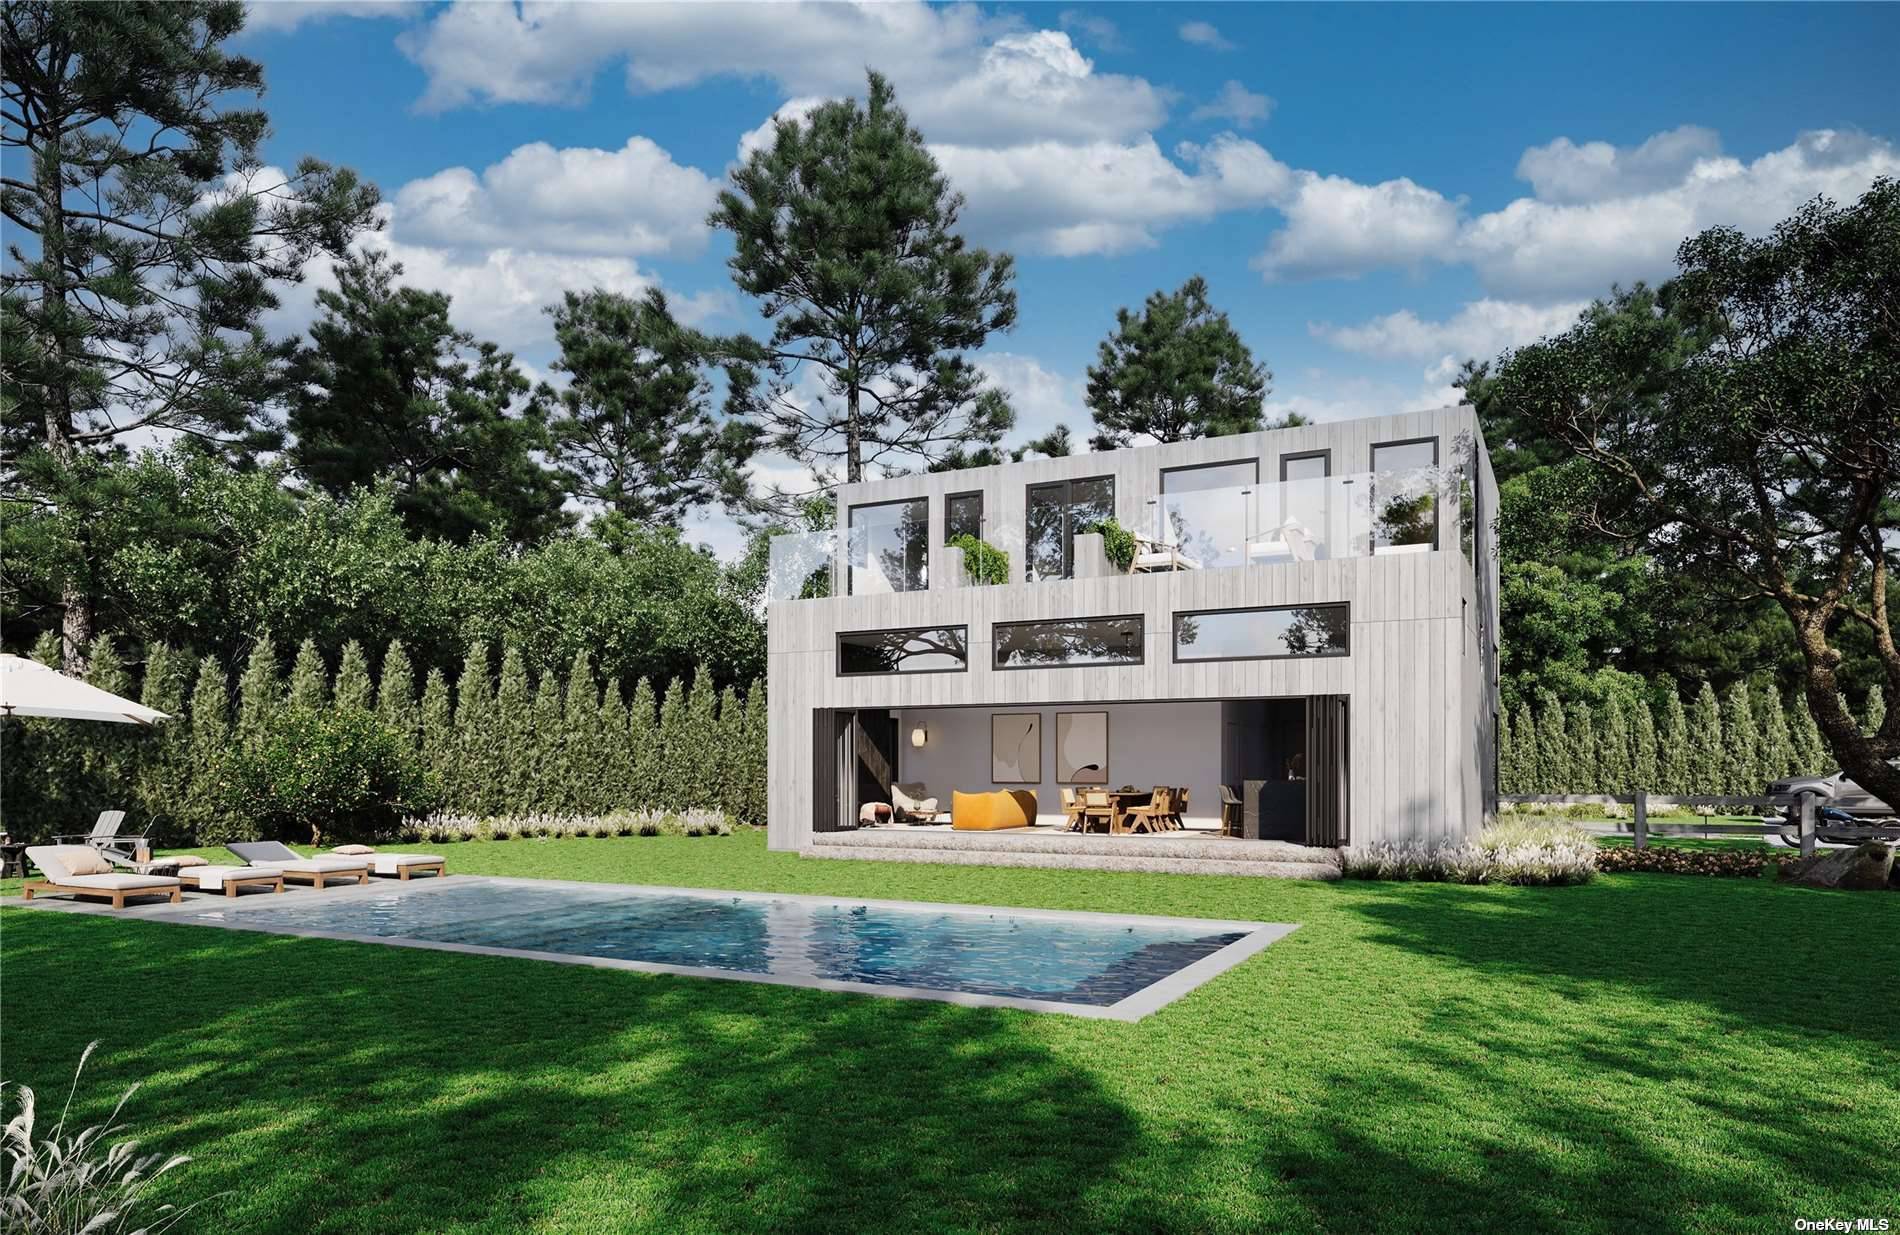 Welcome to your dream home, a slice of modern sophistication nestled in the idyllic setting of the Hamptons.